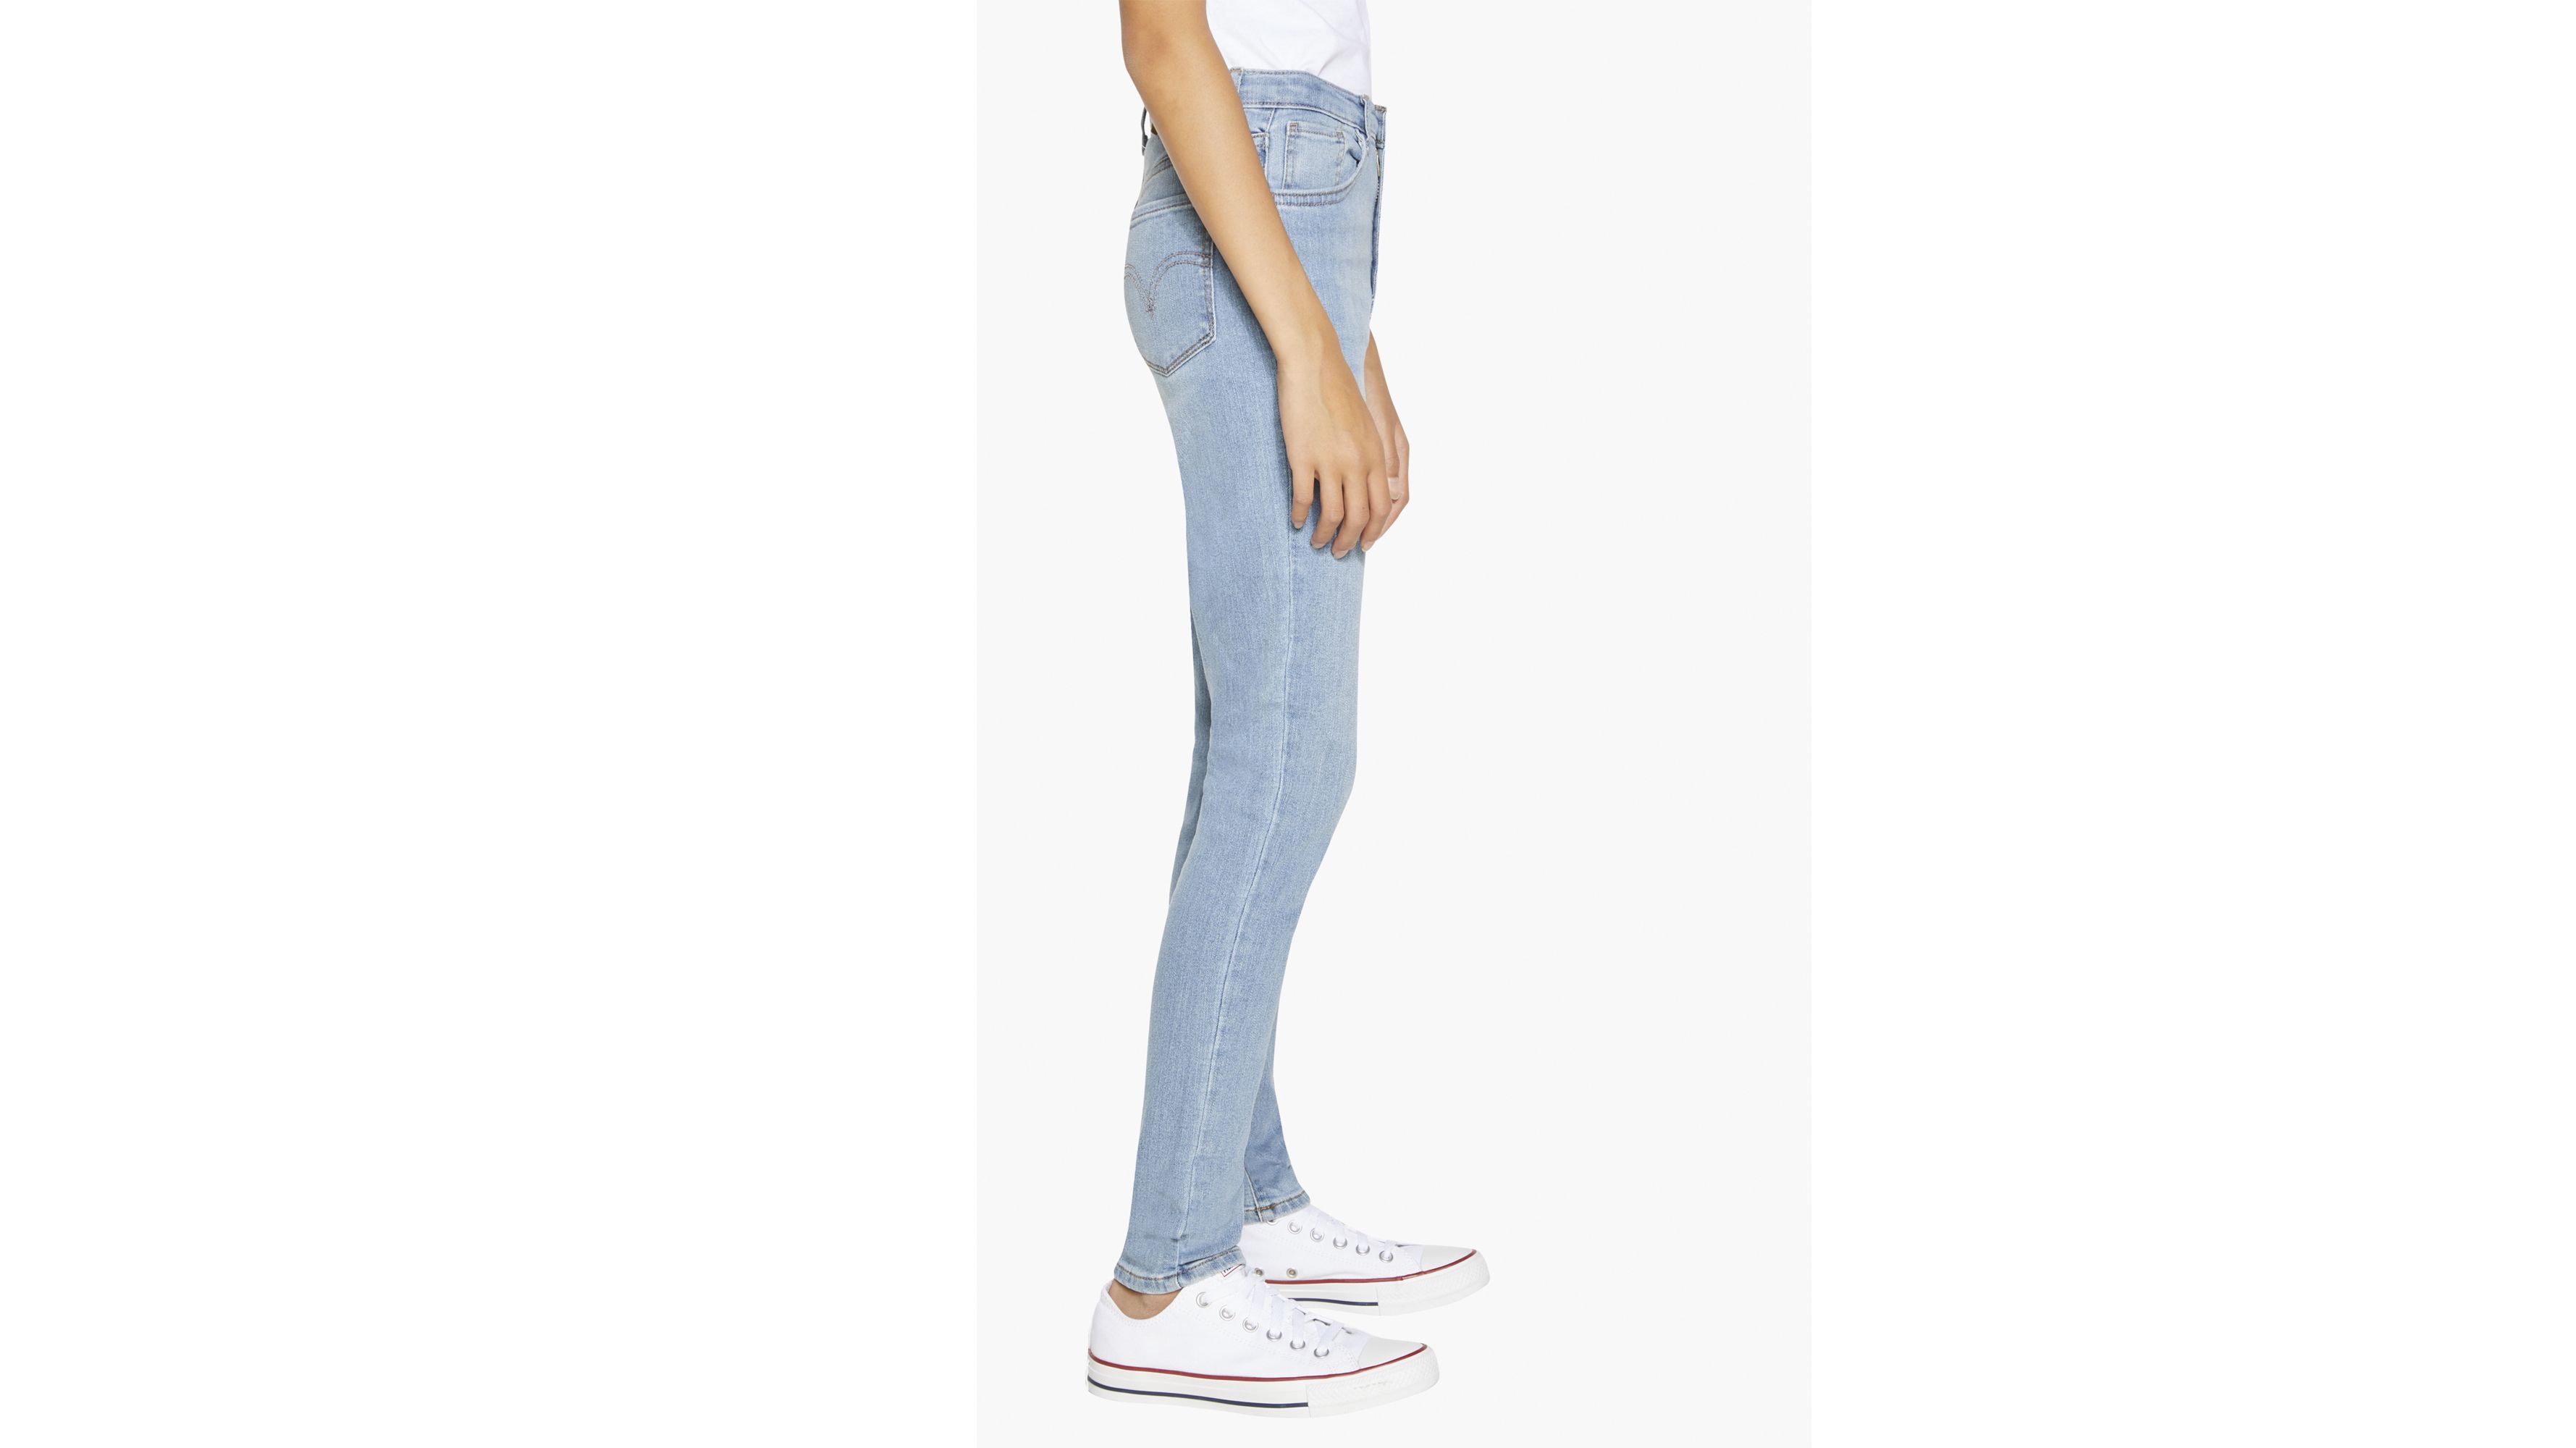 m and s skinny jeans